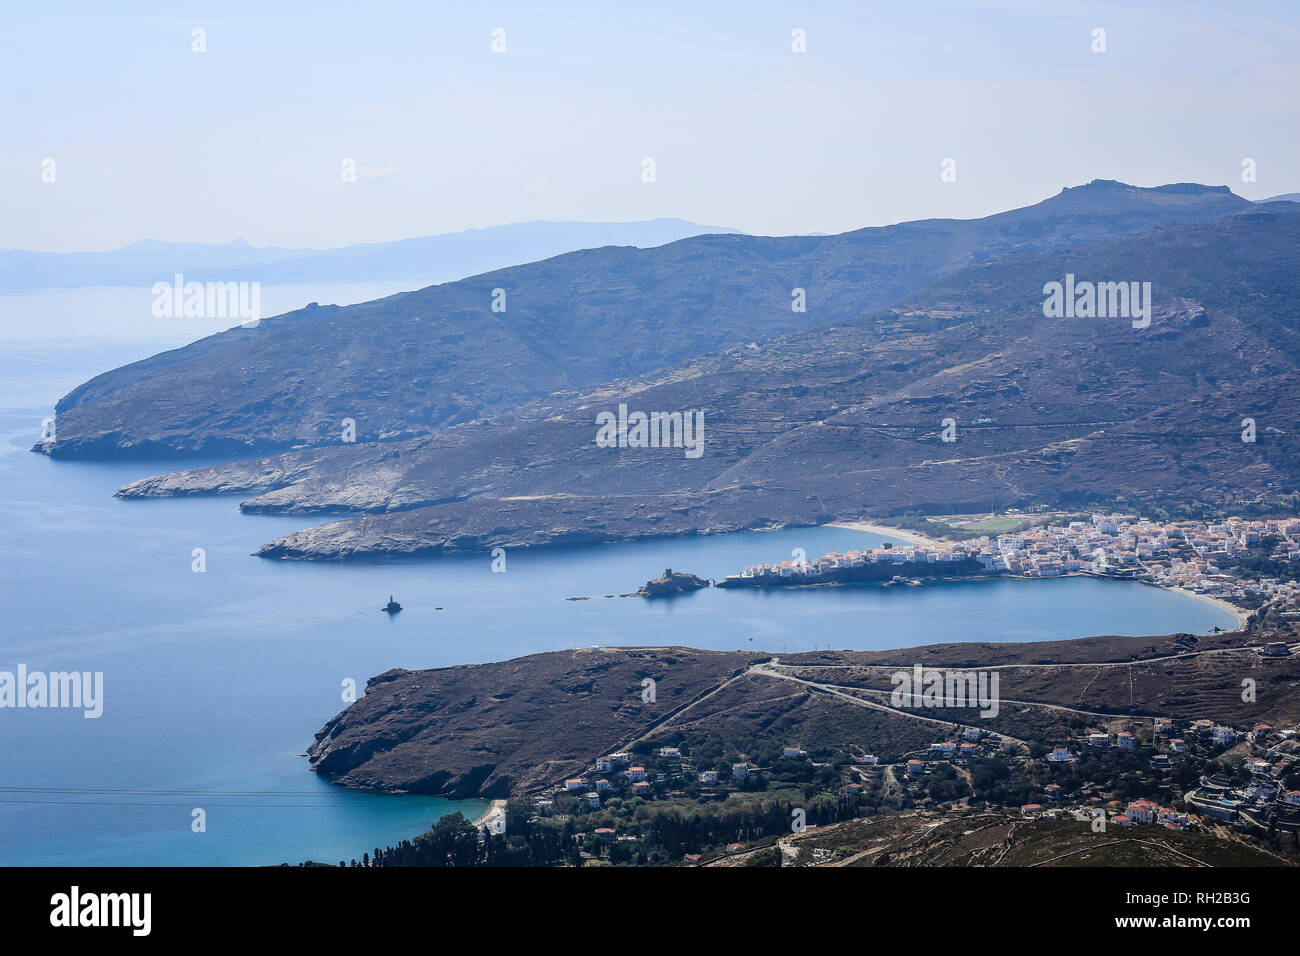 Ville de l'île Andros, Andros, Cyclades, Grèce - Paysage côtier avec la capitale (Chora) Andros. Andros-Stadt, Insel Krk, Andros, Grèce - Banque D'Images